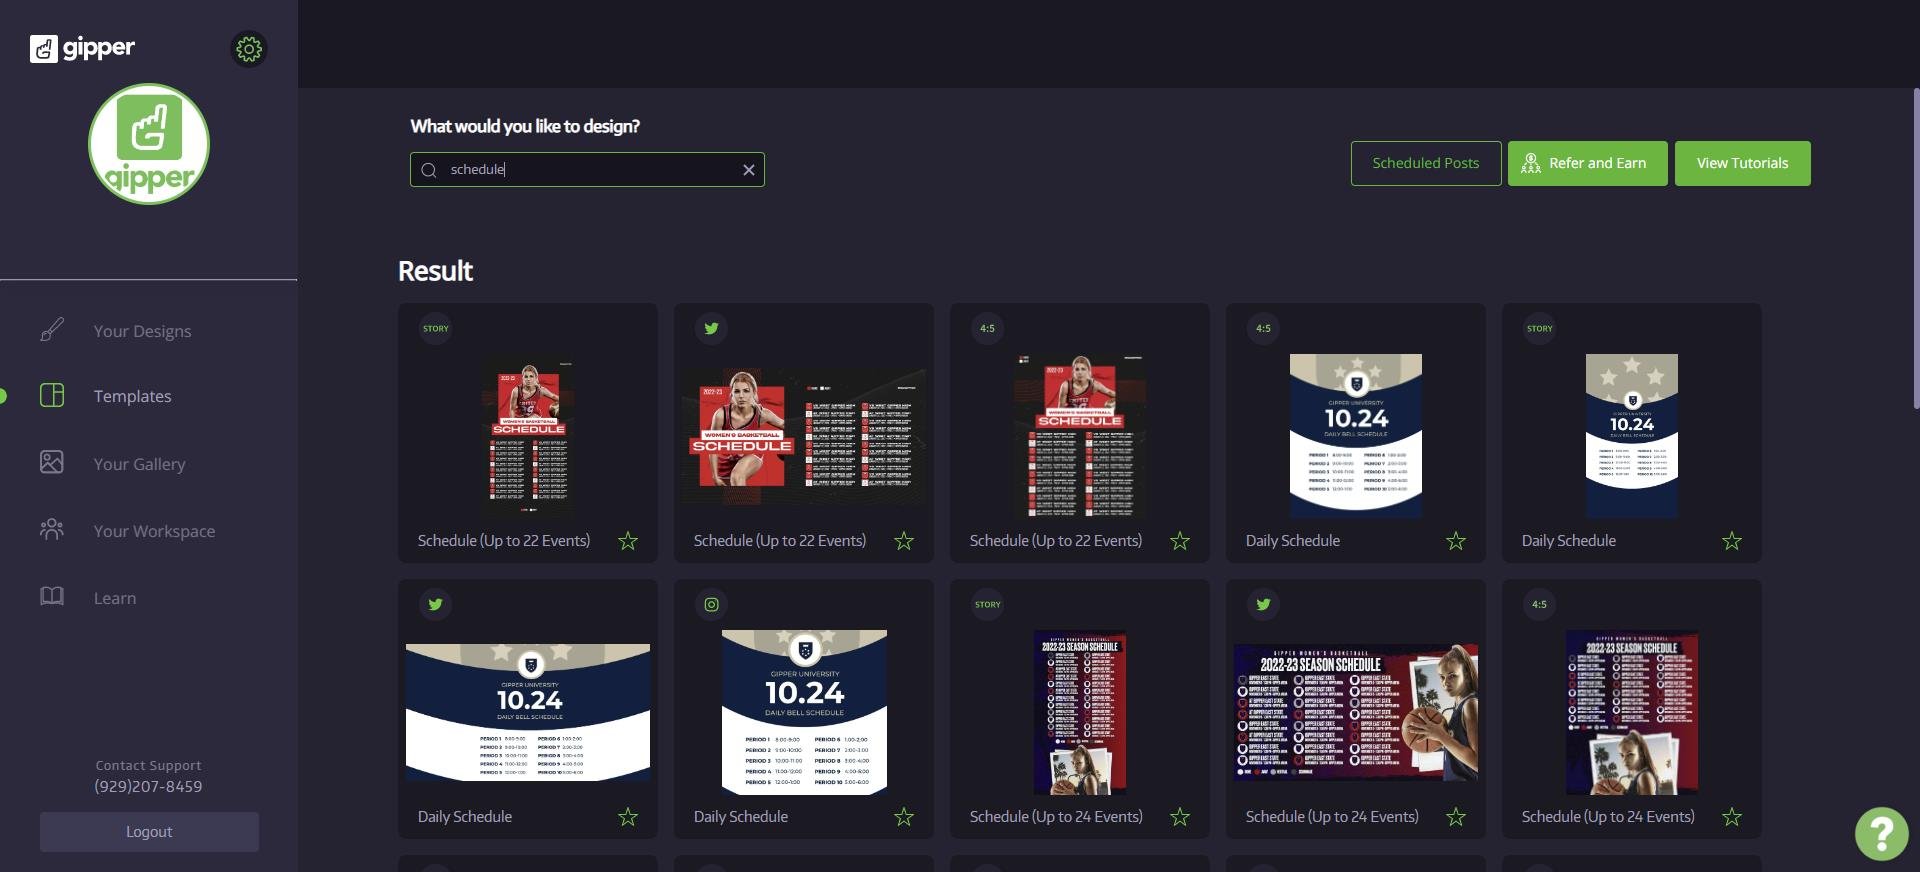 template dashboard showing season schedule graphic templates for users to choose what they want to create
